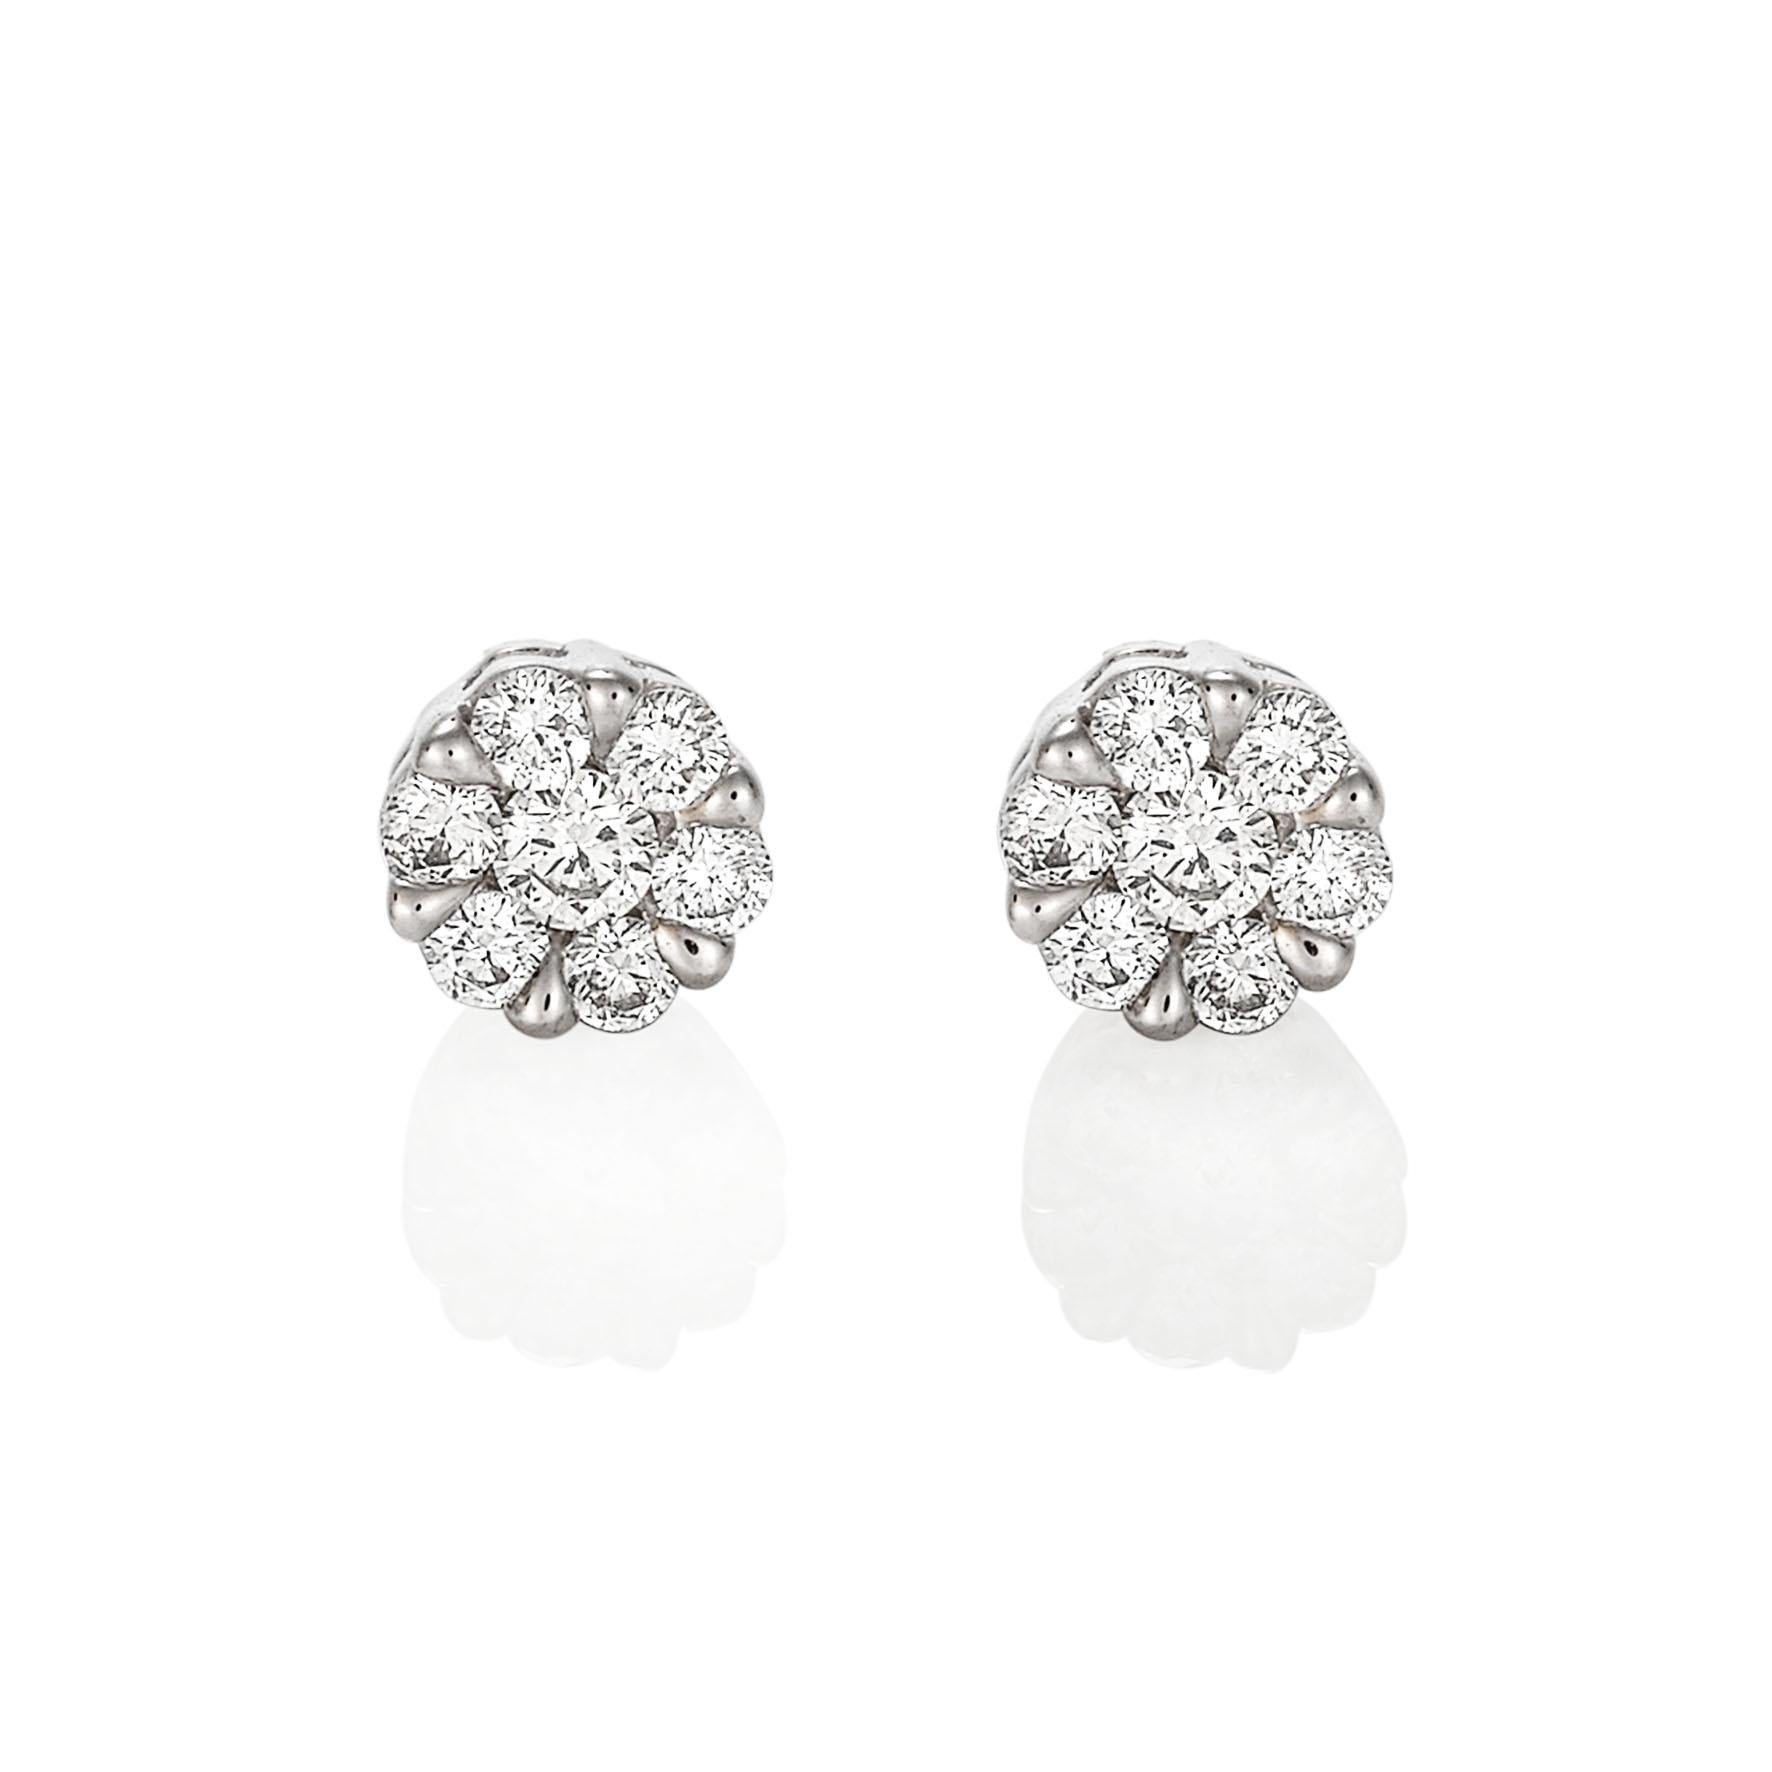 Giulians 18 karat white gold diamond set stud earrings.  Each earring features 6 round brilliant cut diamonds in prong settings and one larger round brilliant cut diamond set in the centre.  The total diamond weight is 14=0.31ct (G-H/VS-Si).  The